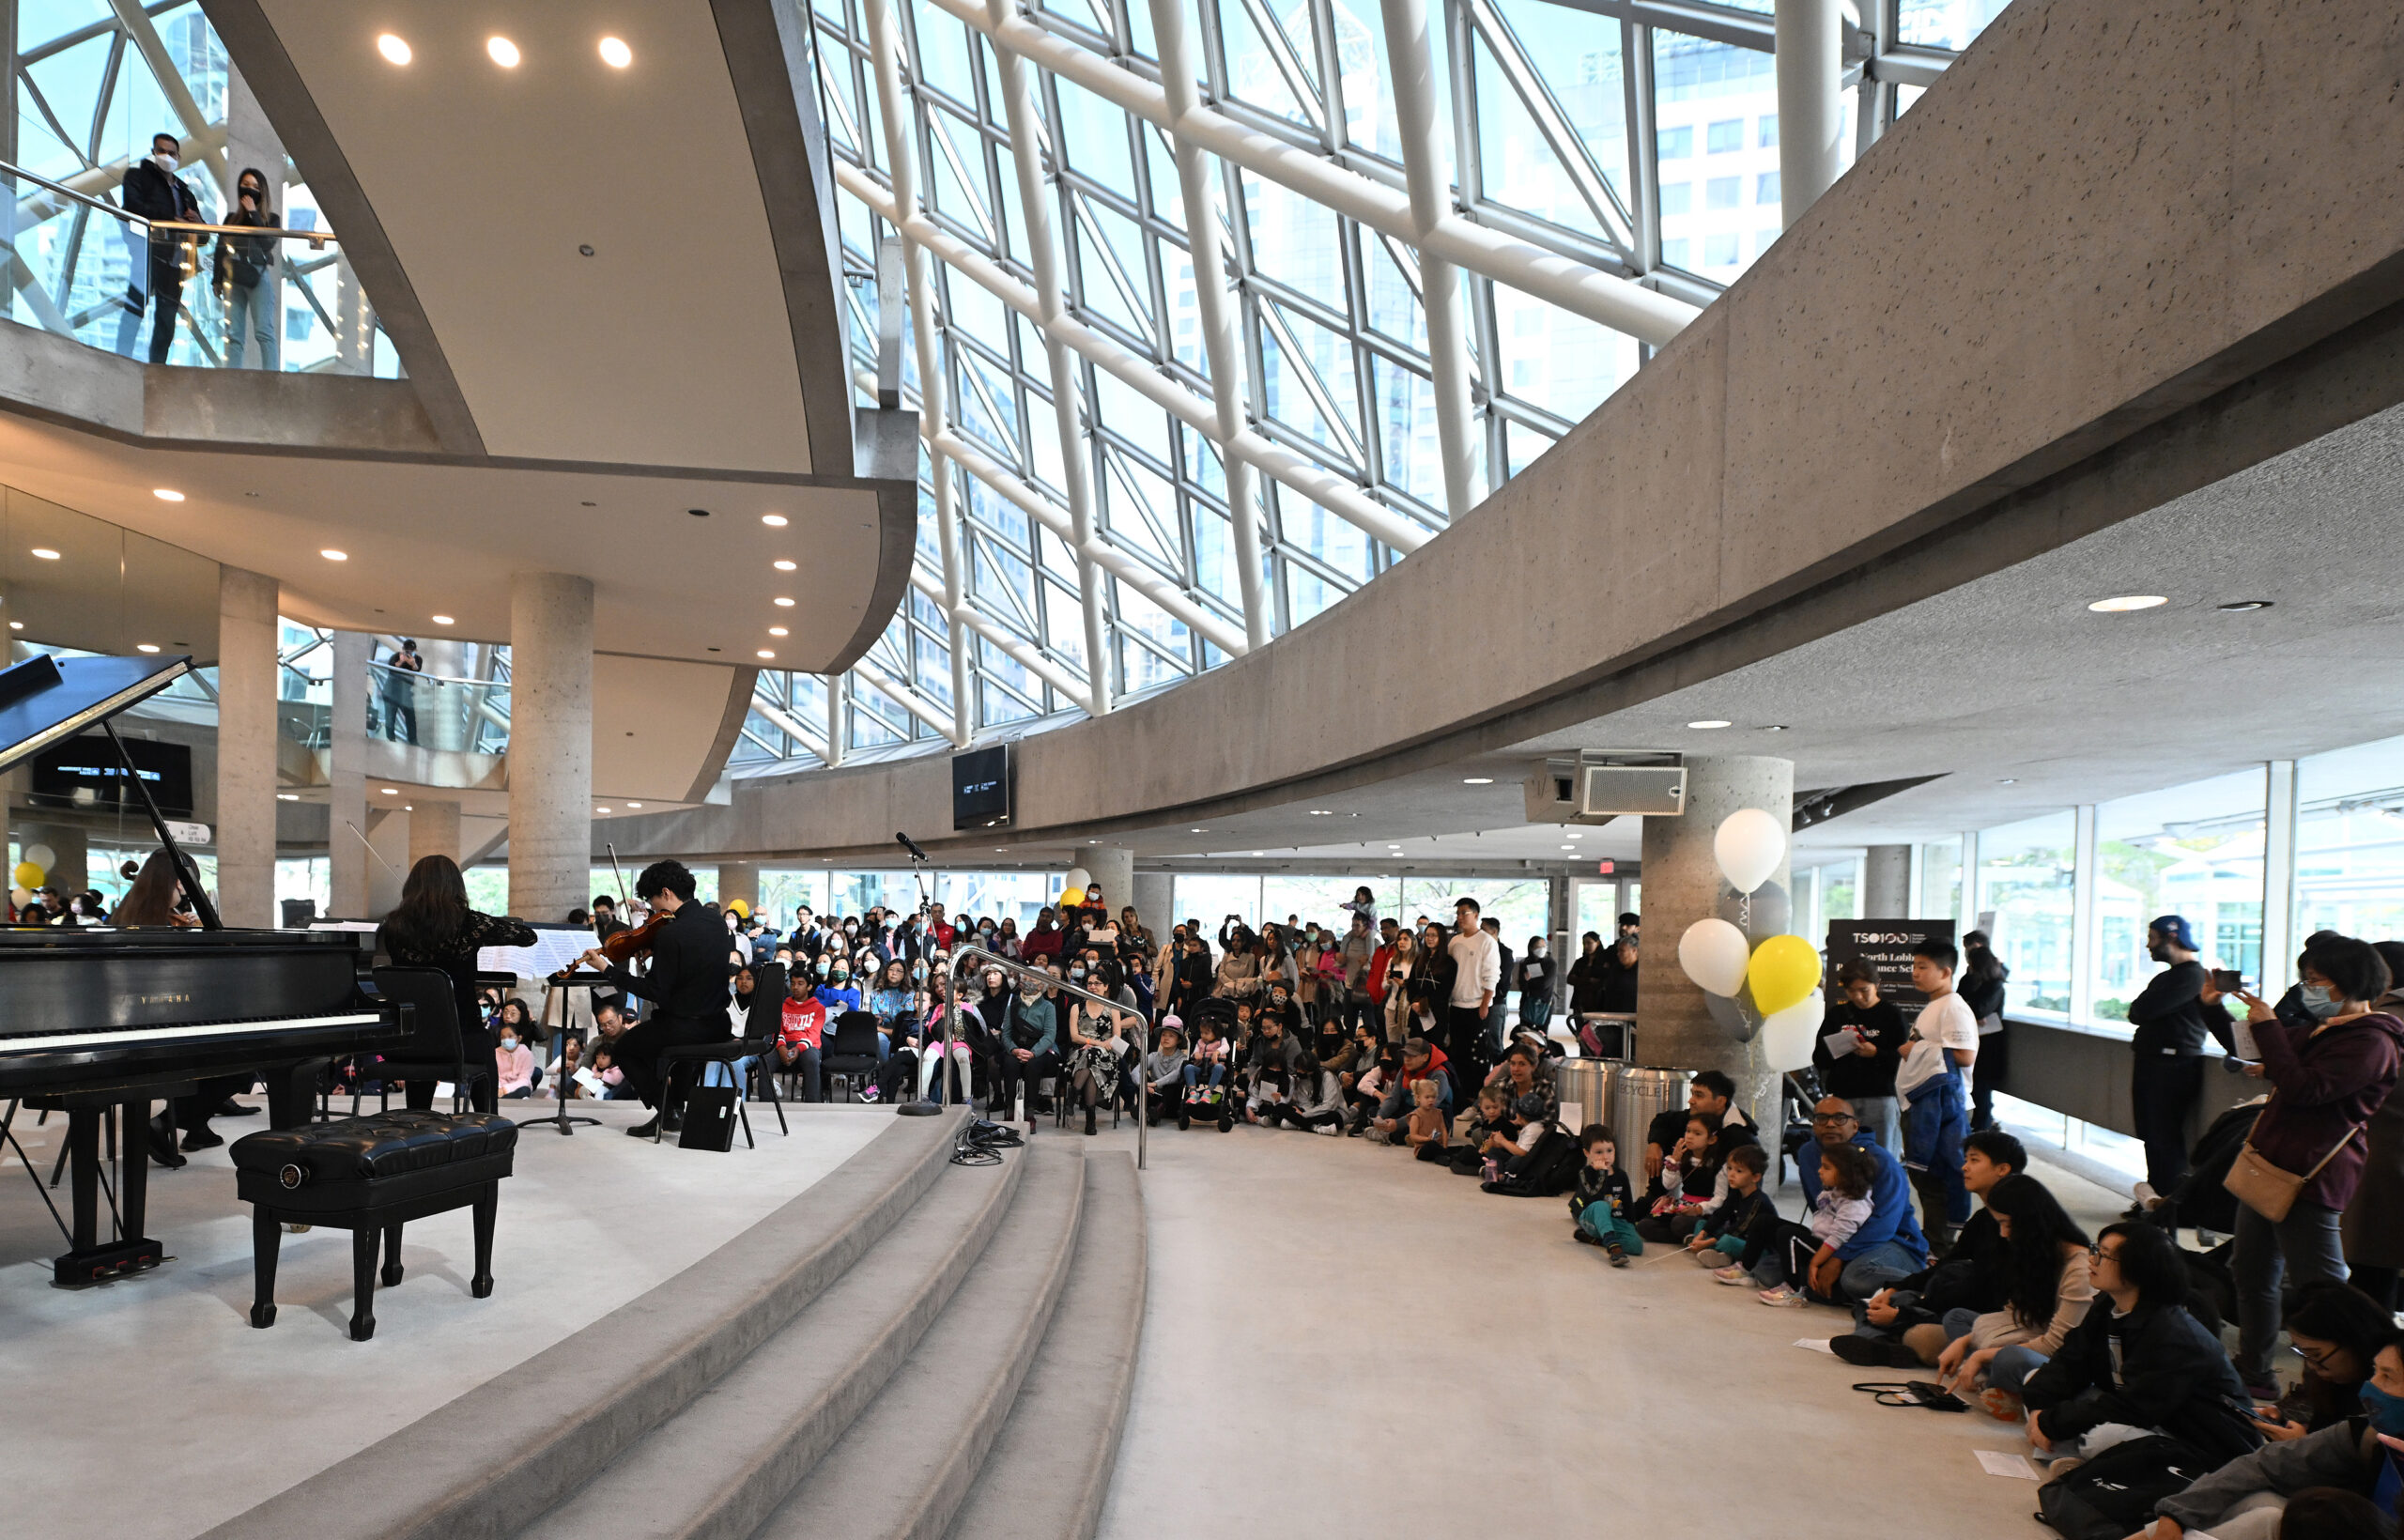 Members of the Toronto Symphony Orchestra in front of a crowd.